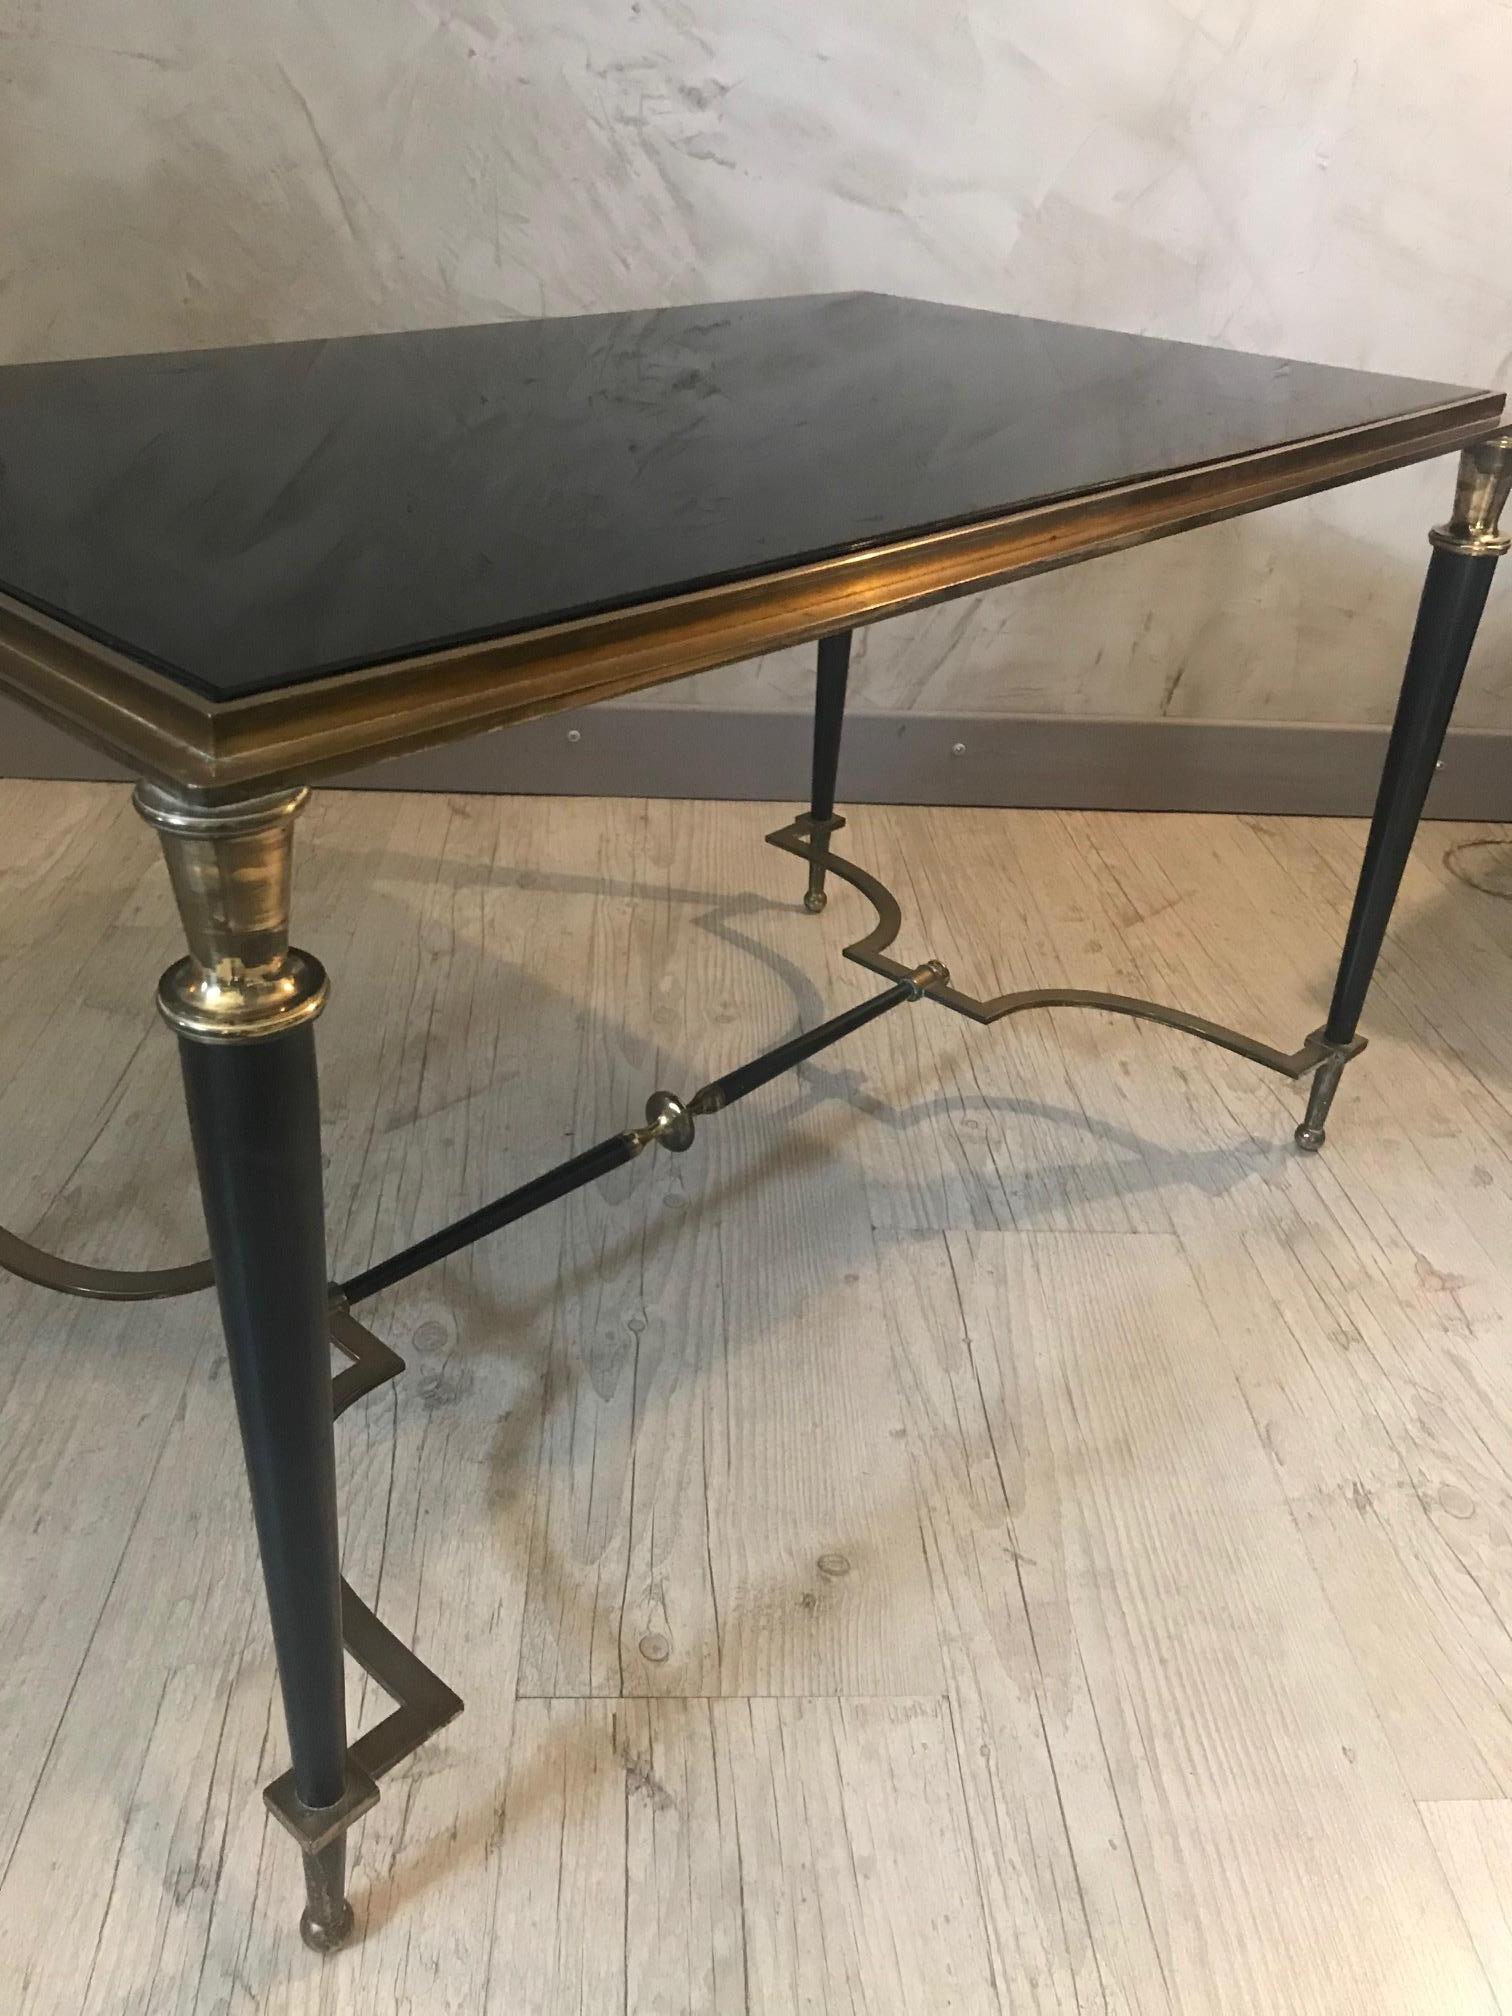 20th Century Maison Baguès Style Brass and Black Glass Coffee Table, 1950s For Sale 2